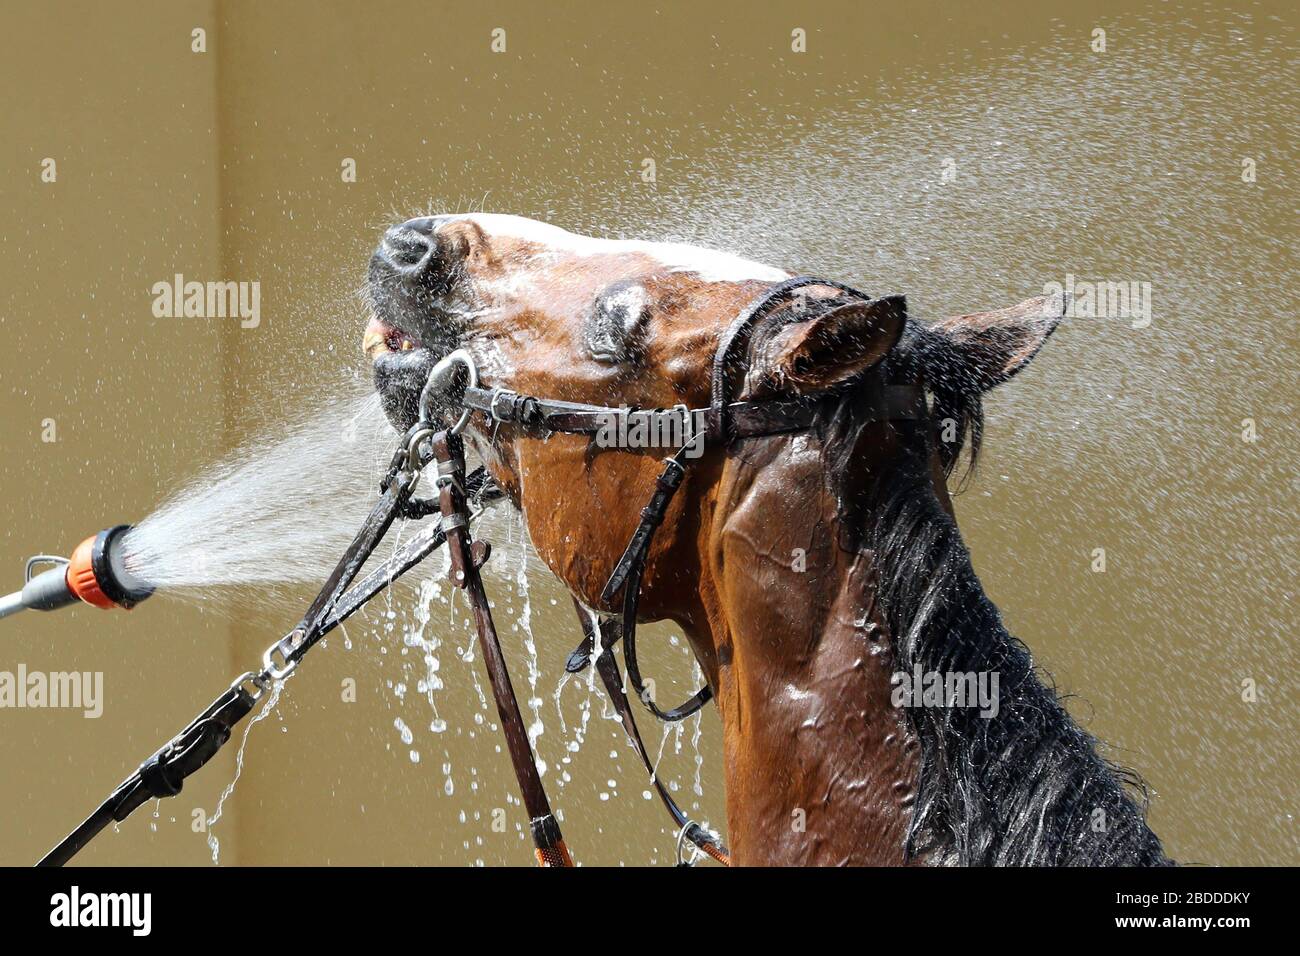 10.05.2018, Magdeburg, Saxony-Anhalt, Germany  - Horse is showered after the race. 00S180510D634CAROEX.JPG [MODEL RELEASE: NOT APPLICABLE, PROPERTY RE Stock Photo